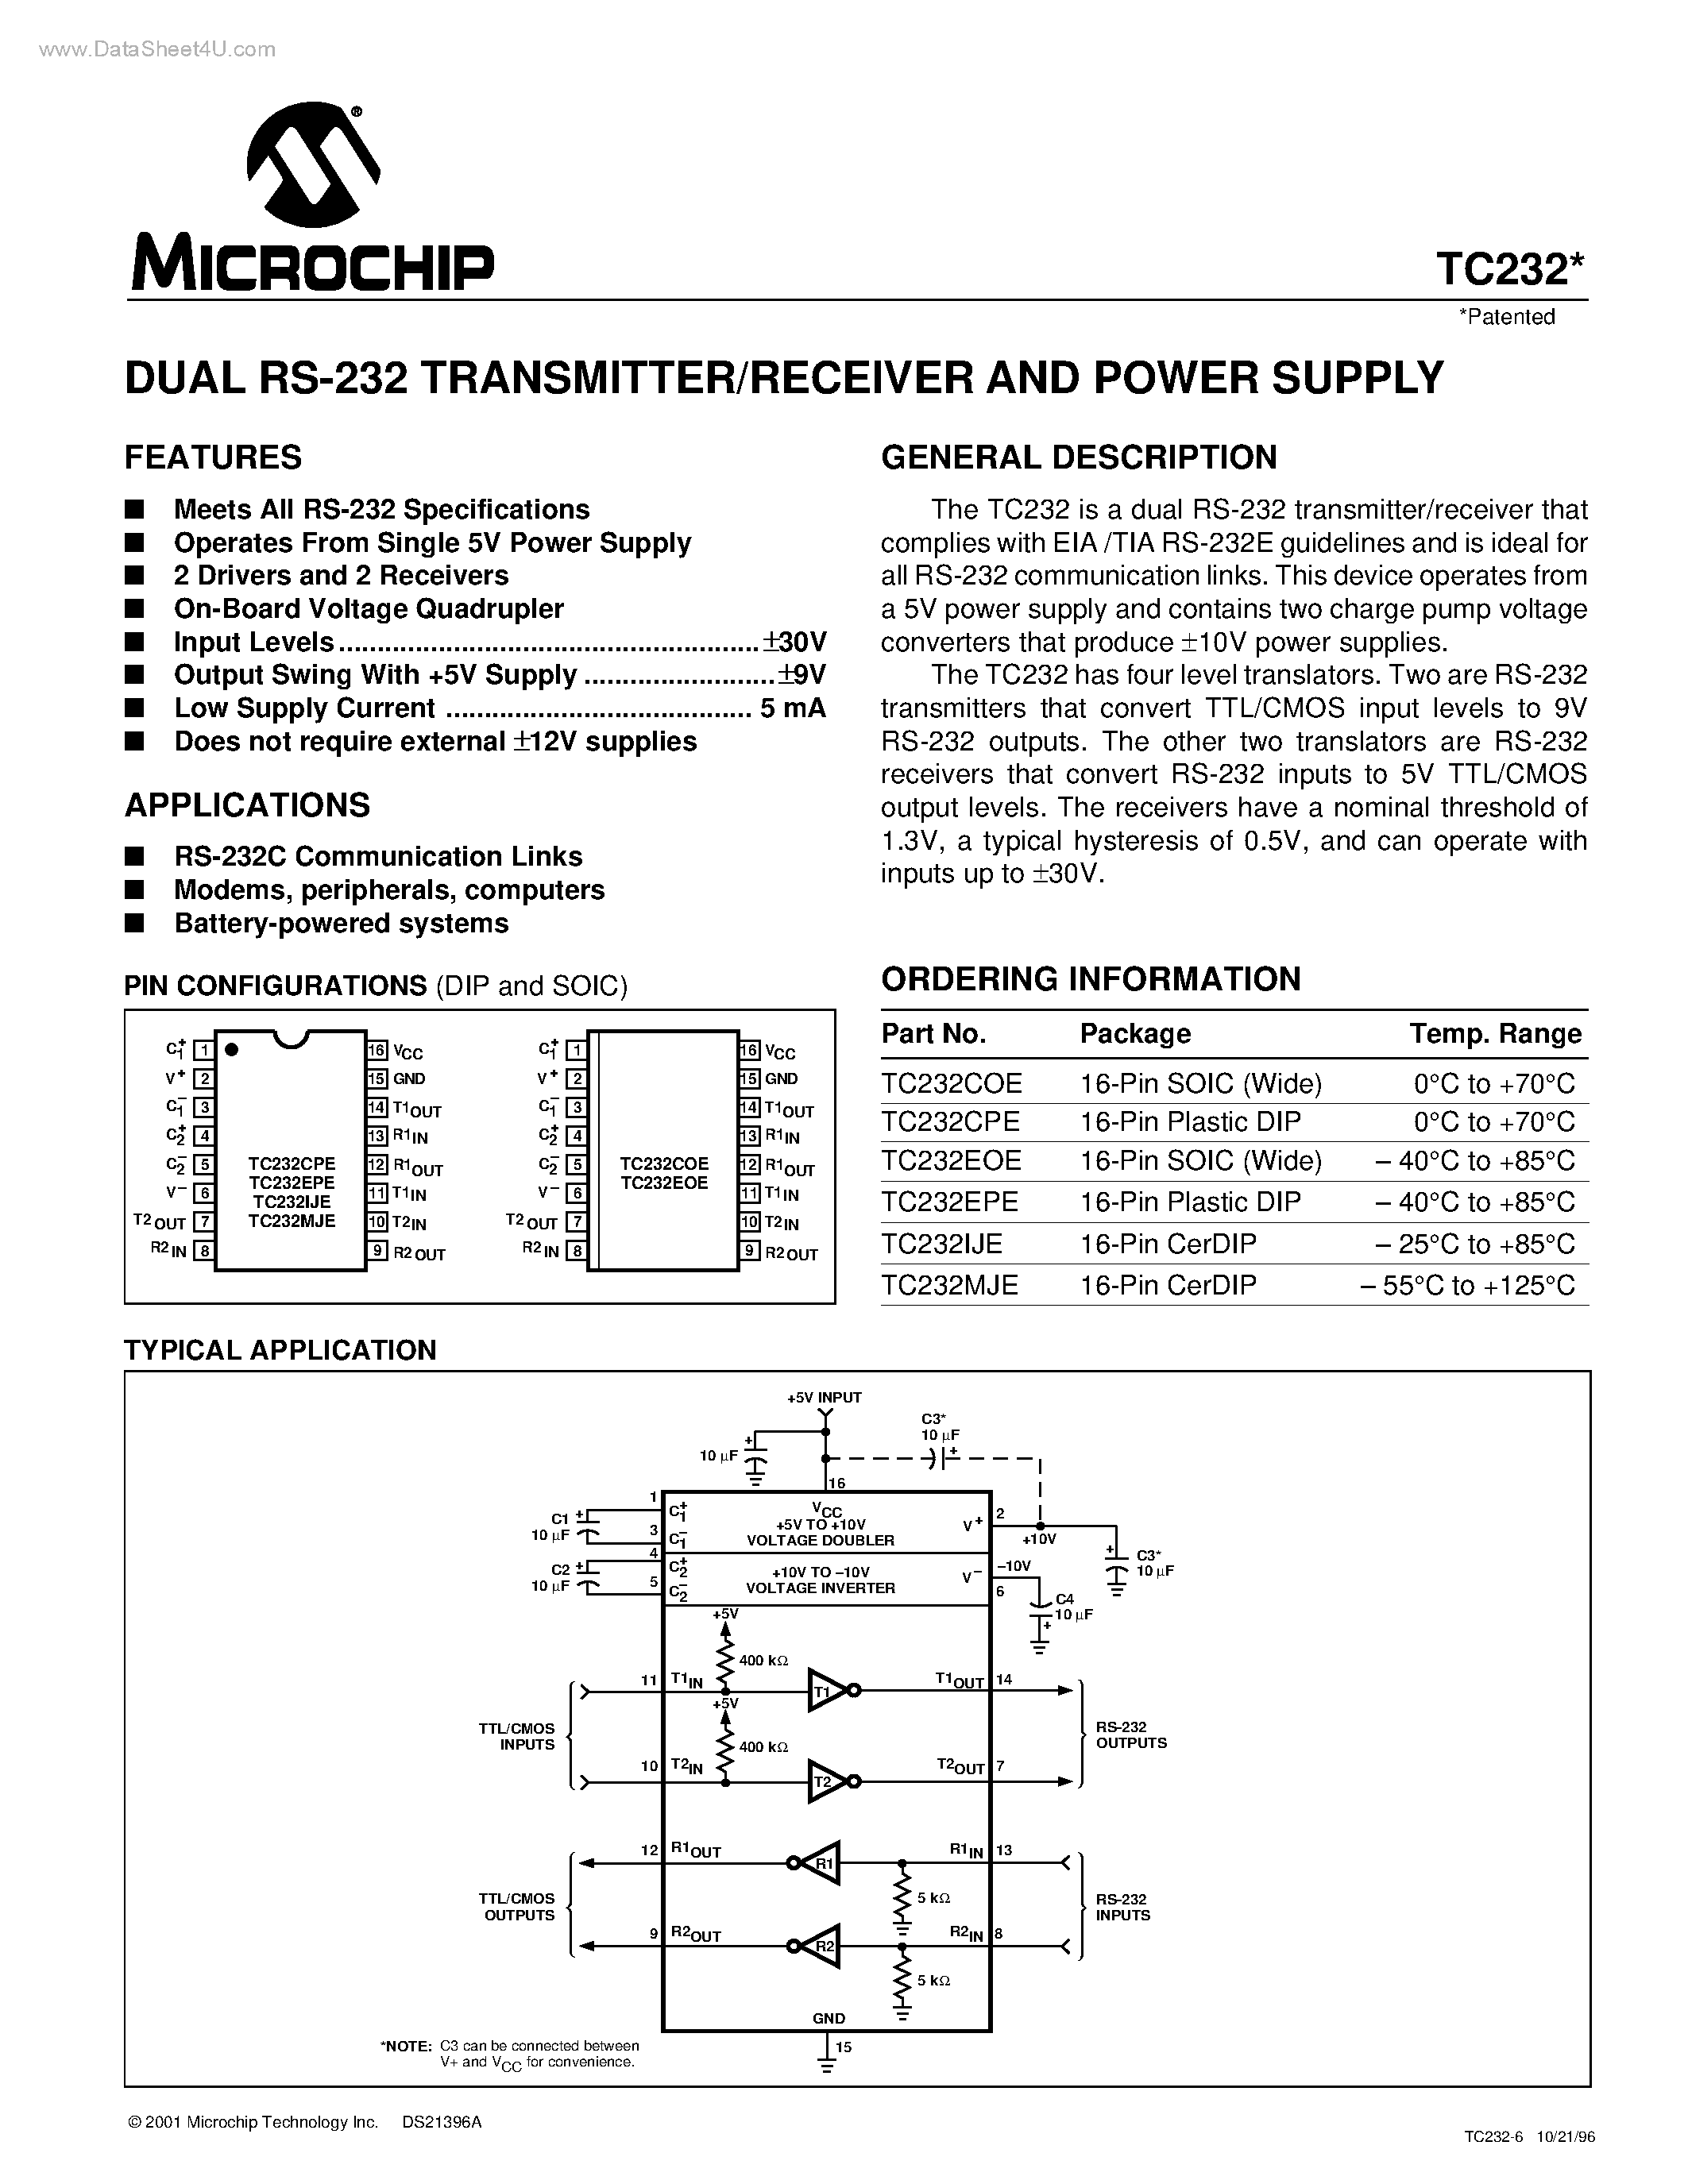 Datasheet TC232 - DUAL RS-232 TRANSMITTER/RECEIVER AND POWER SUPPLY page 1